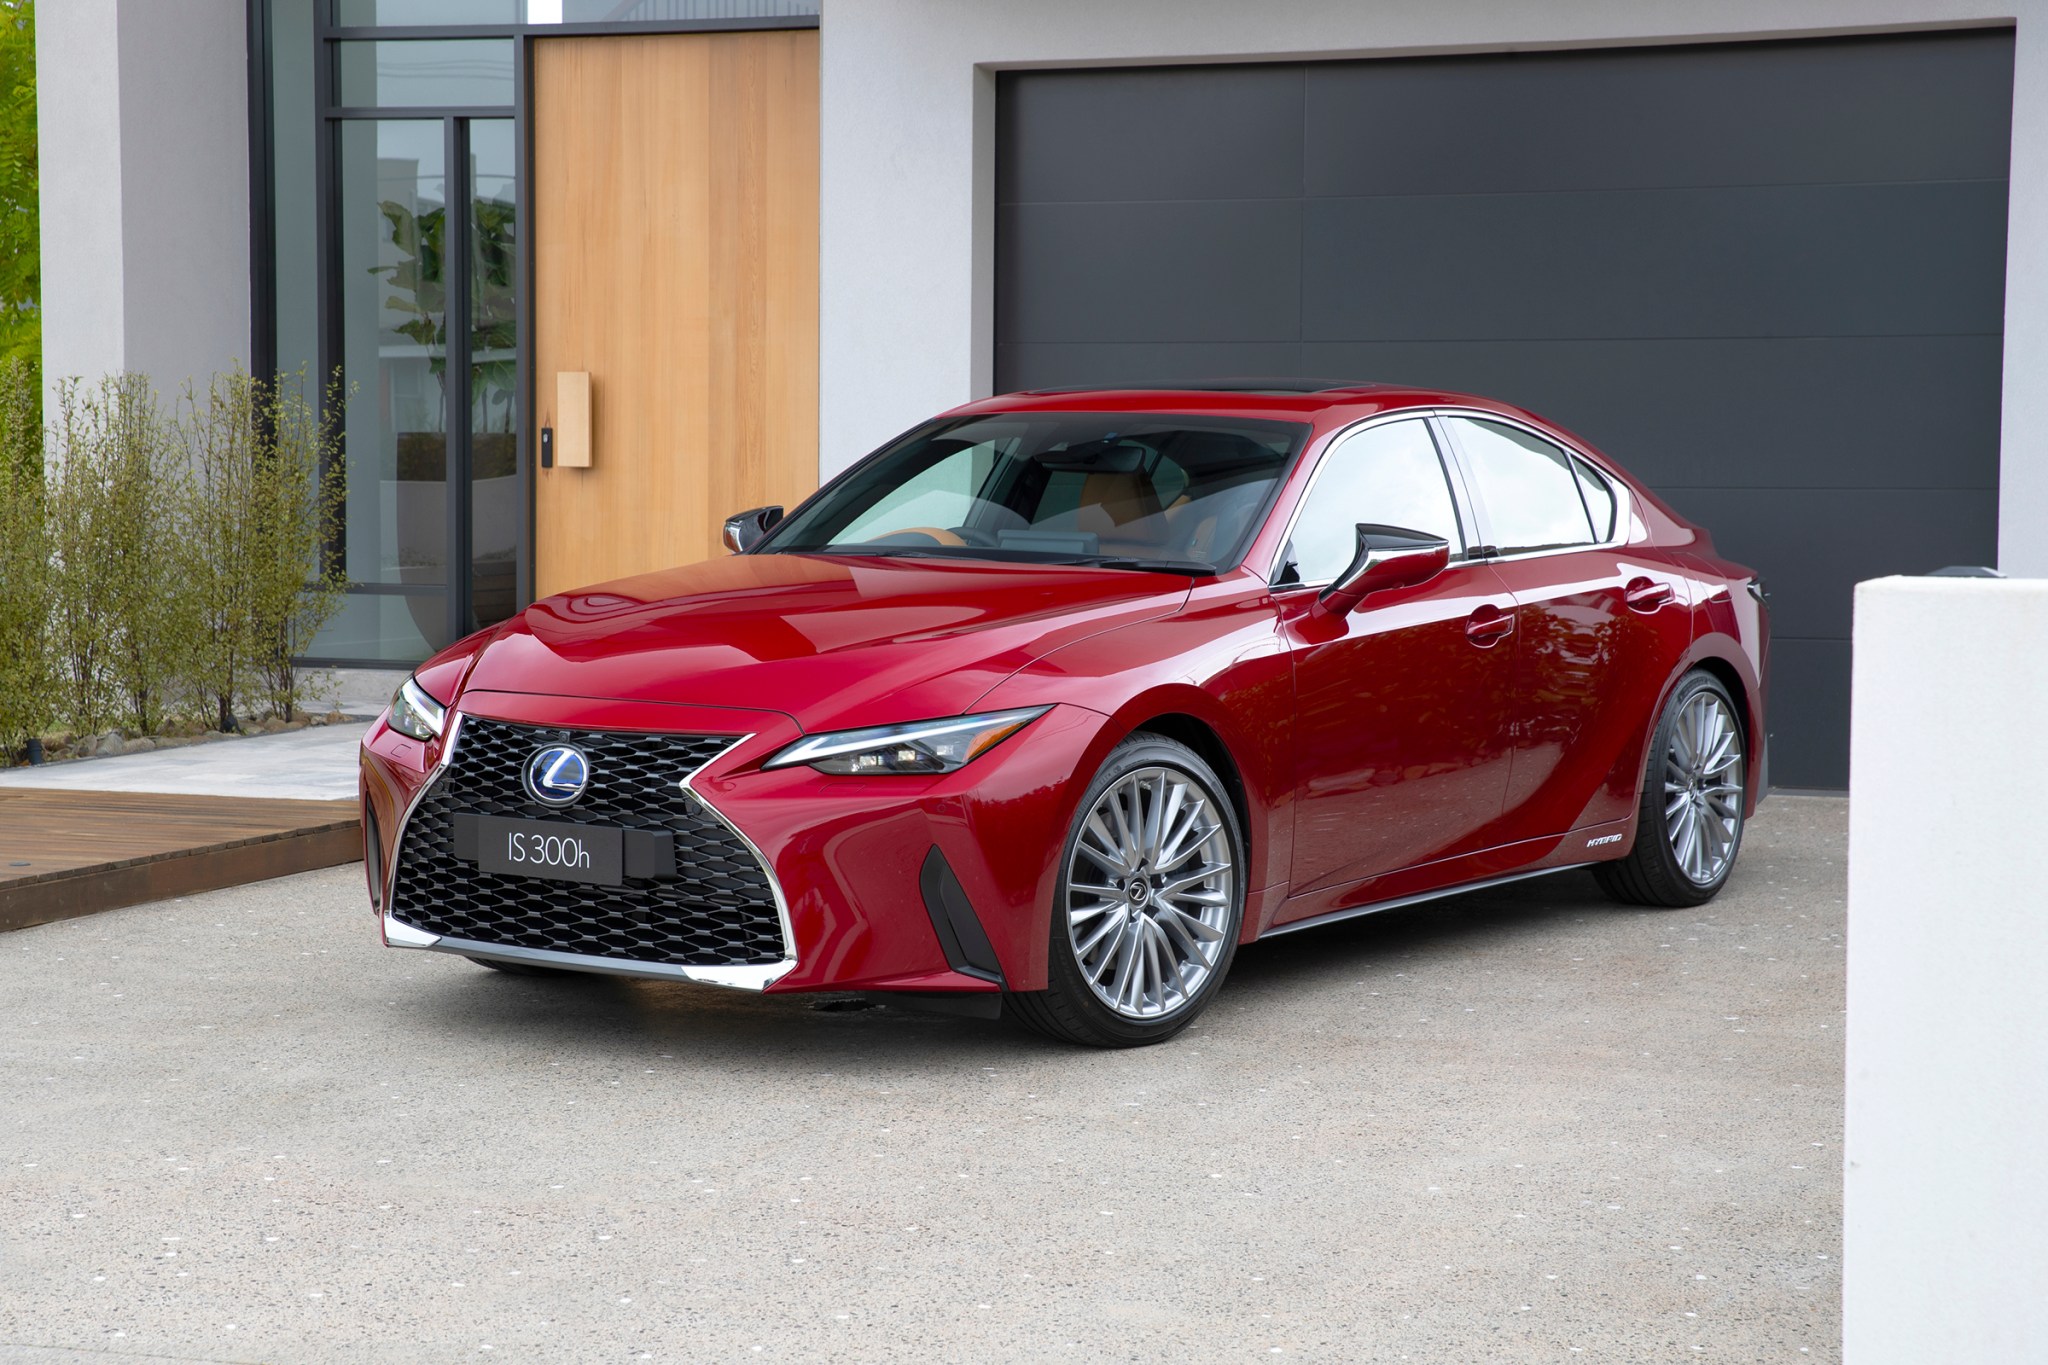 Sometimes used cars are purchased from individuals rather than dealerships, which can require more of the buyer’s participation in the process of transferring the ti. Lexus IS 300h review: Hybrid sedan tested - EV Central